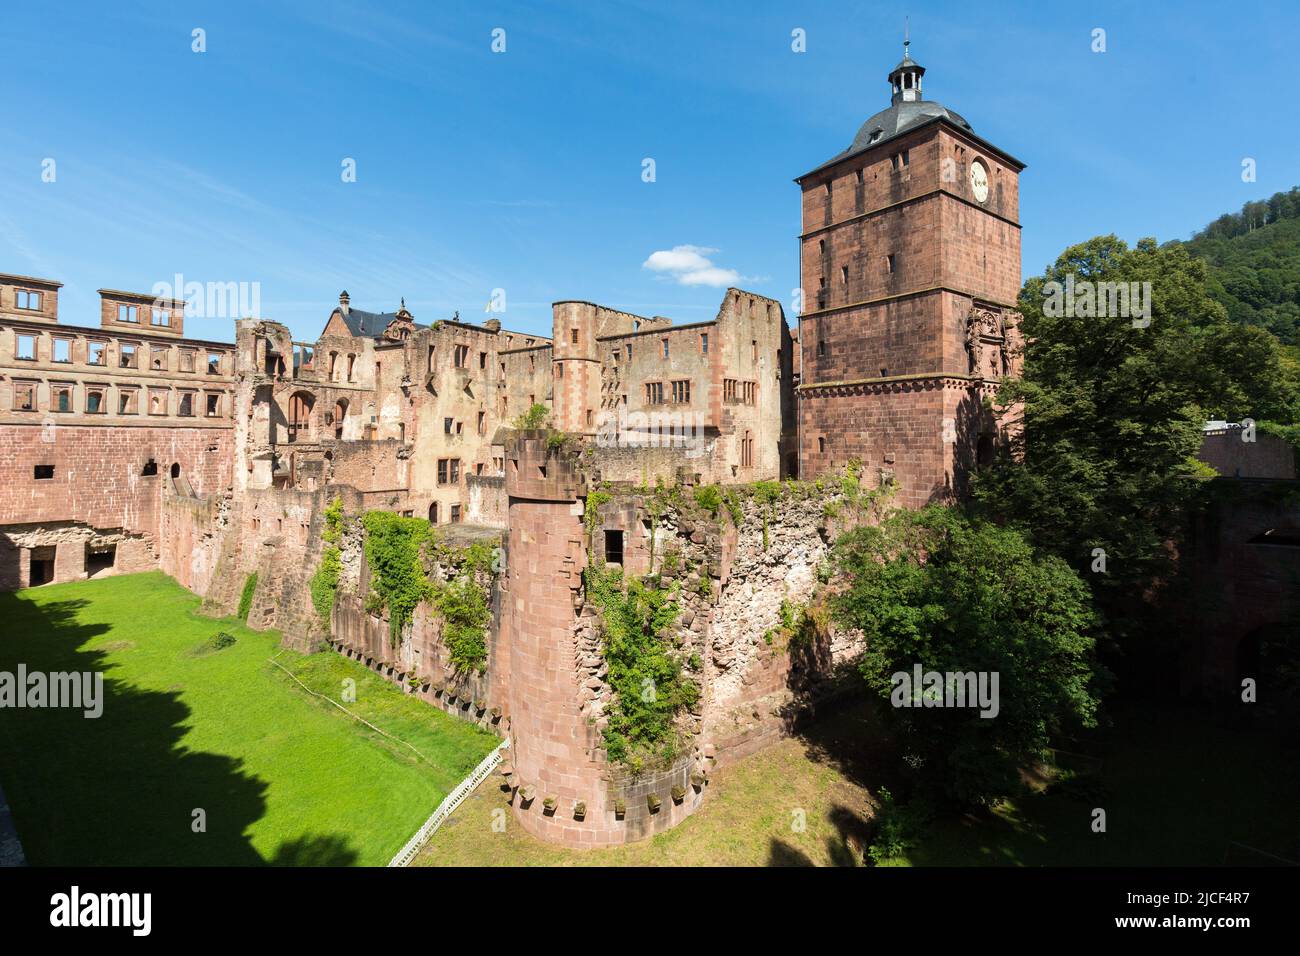 Heidelberg, Germany - Aug 25, 2021: Heidelberger Schloss (Heidelberg Castle). View on tower 'Seltenleer', gate tower with clock and the Westzwinger. Stock Photo